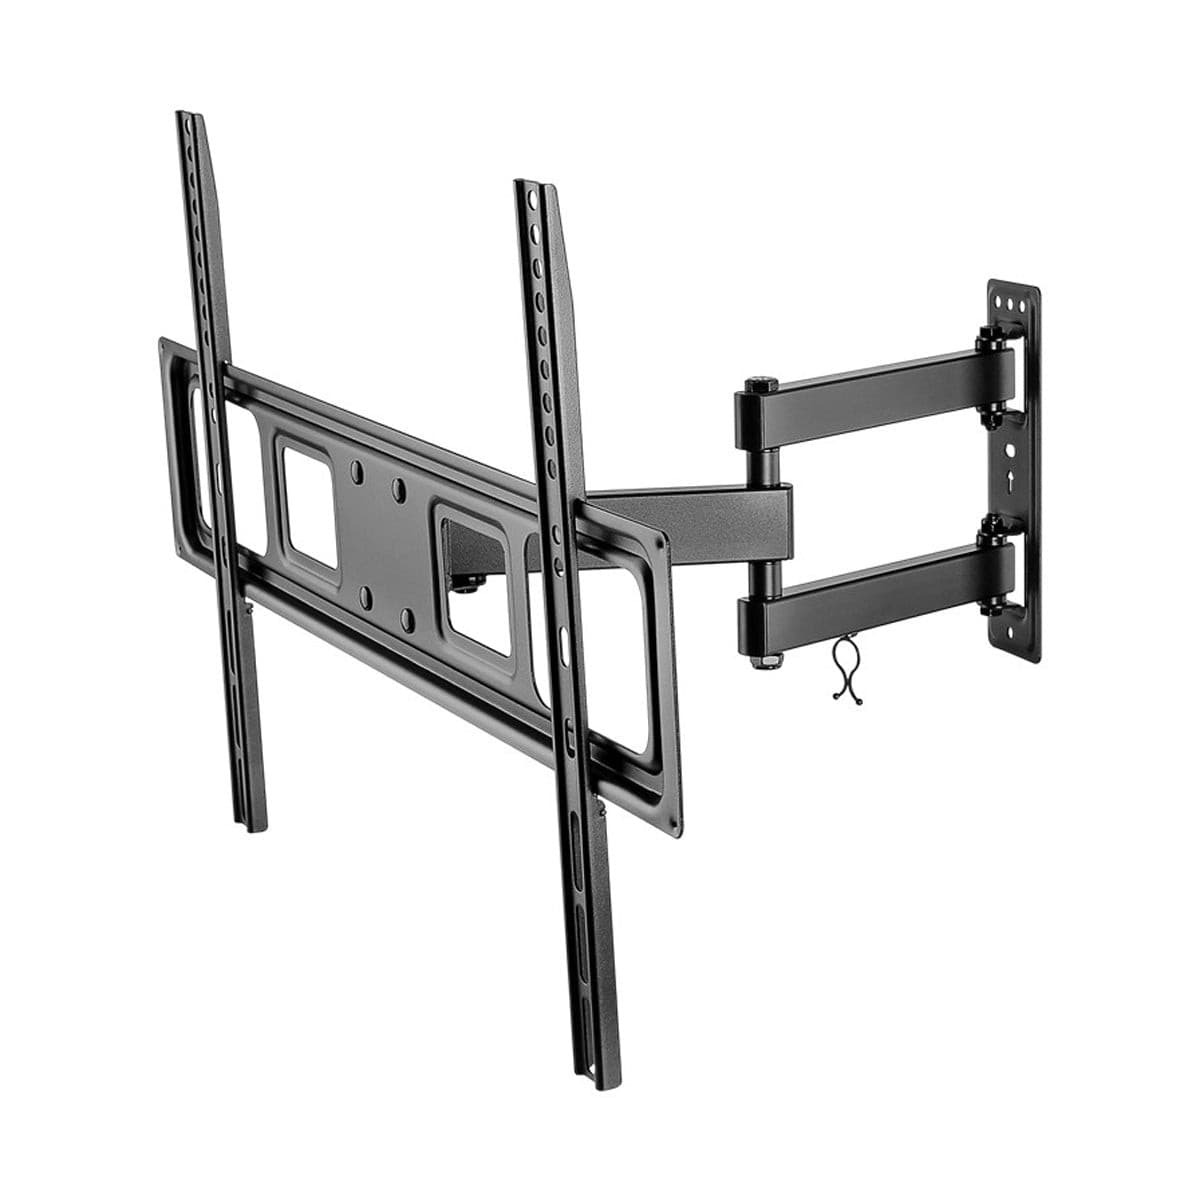 Goobay TV Wall Mount Basic FULLMOTION Large for TVs 37 to 70 inch.